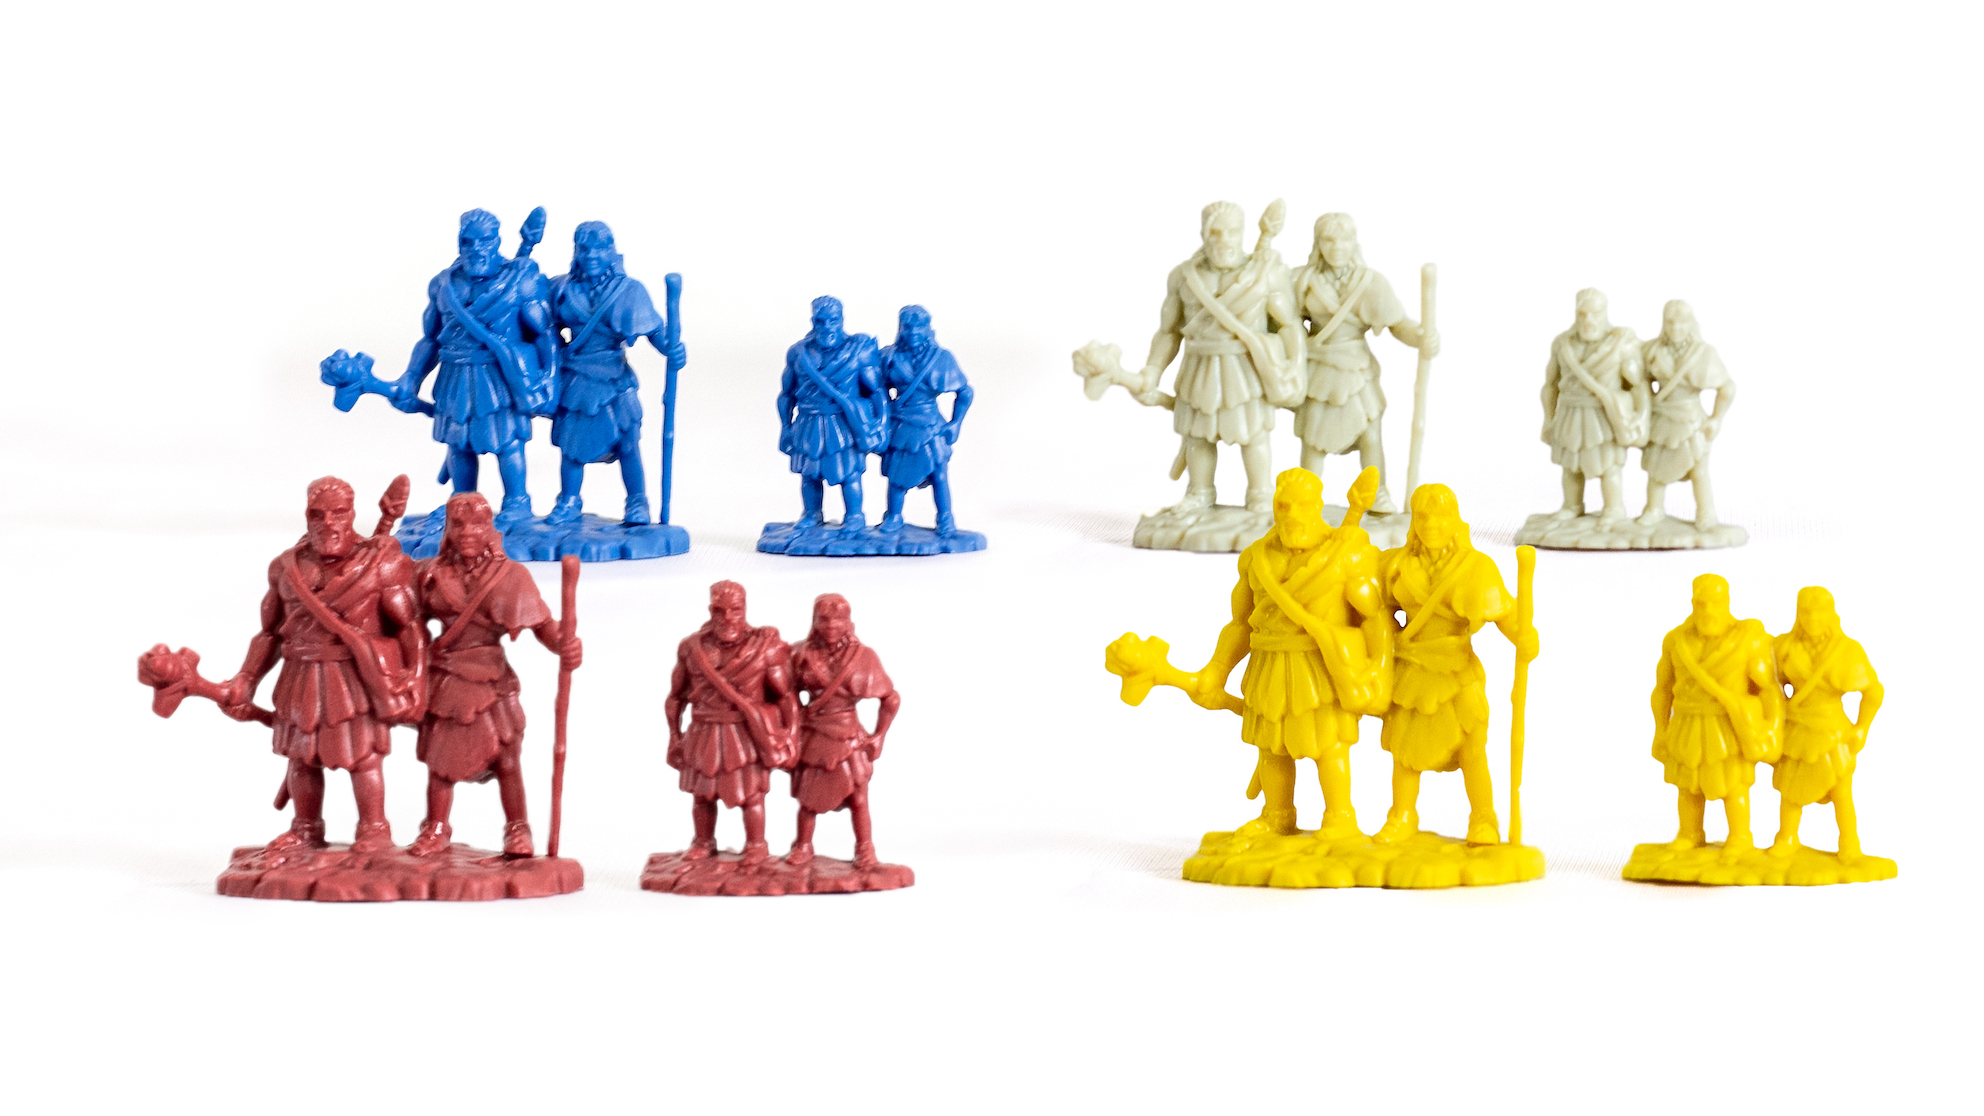 Player pieces for CATAN Dawn of Humankind